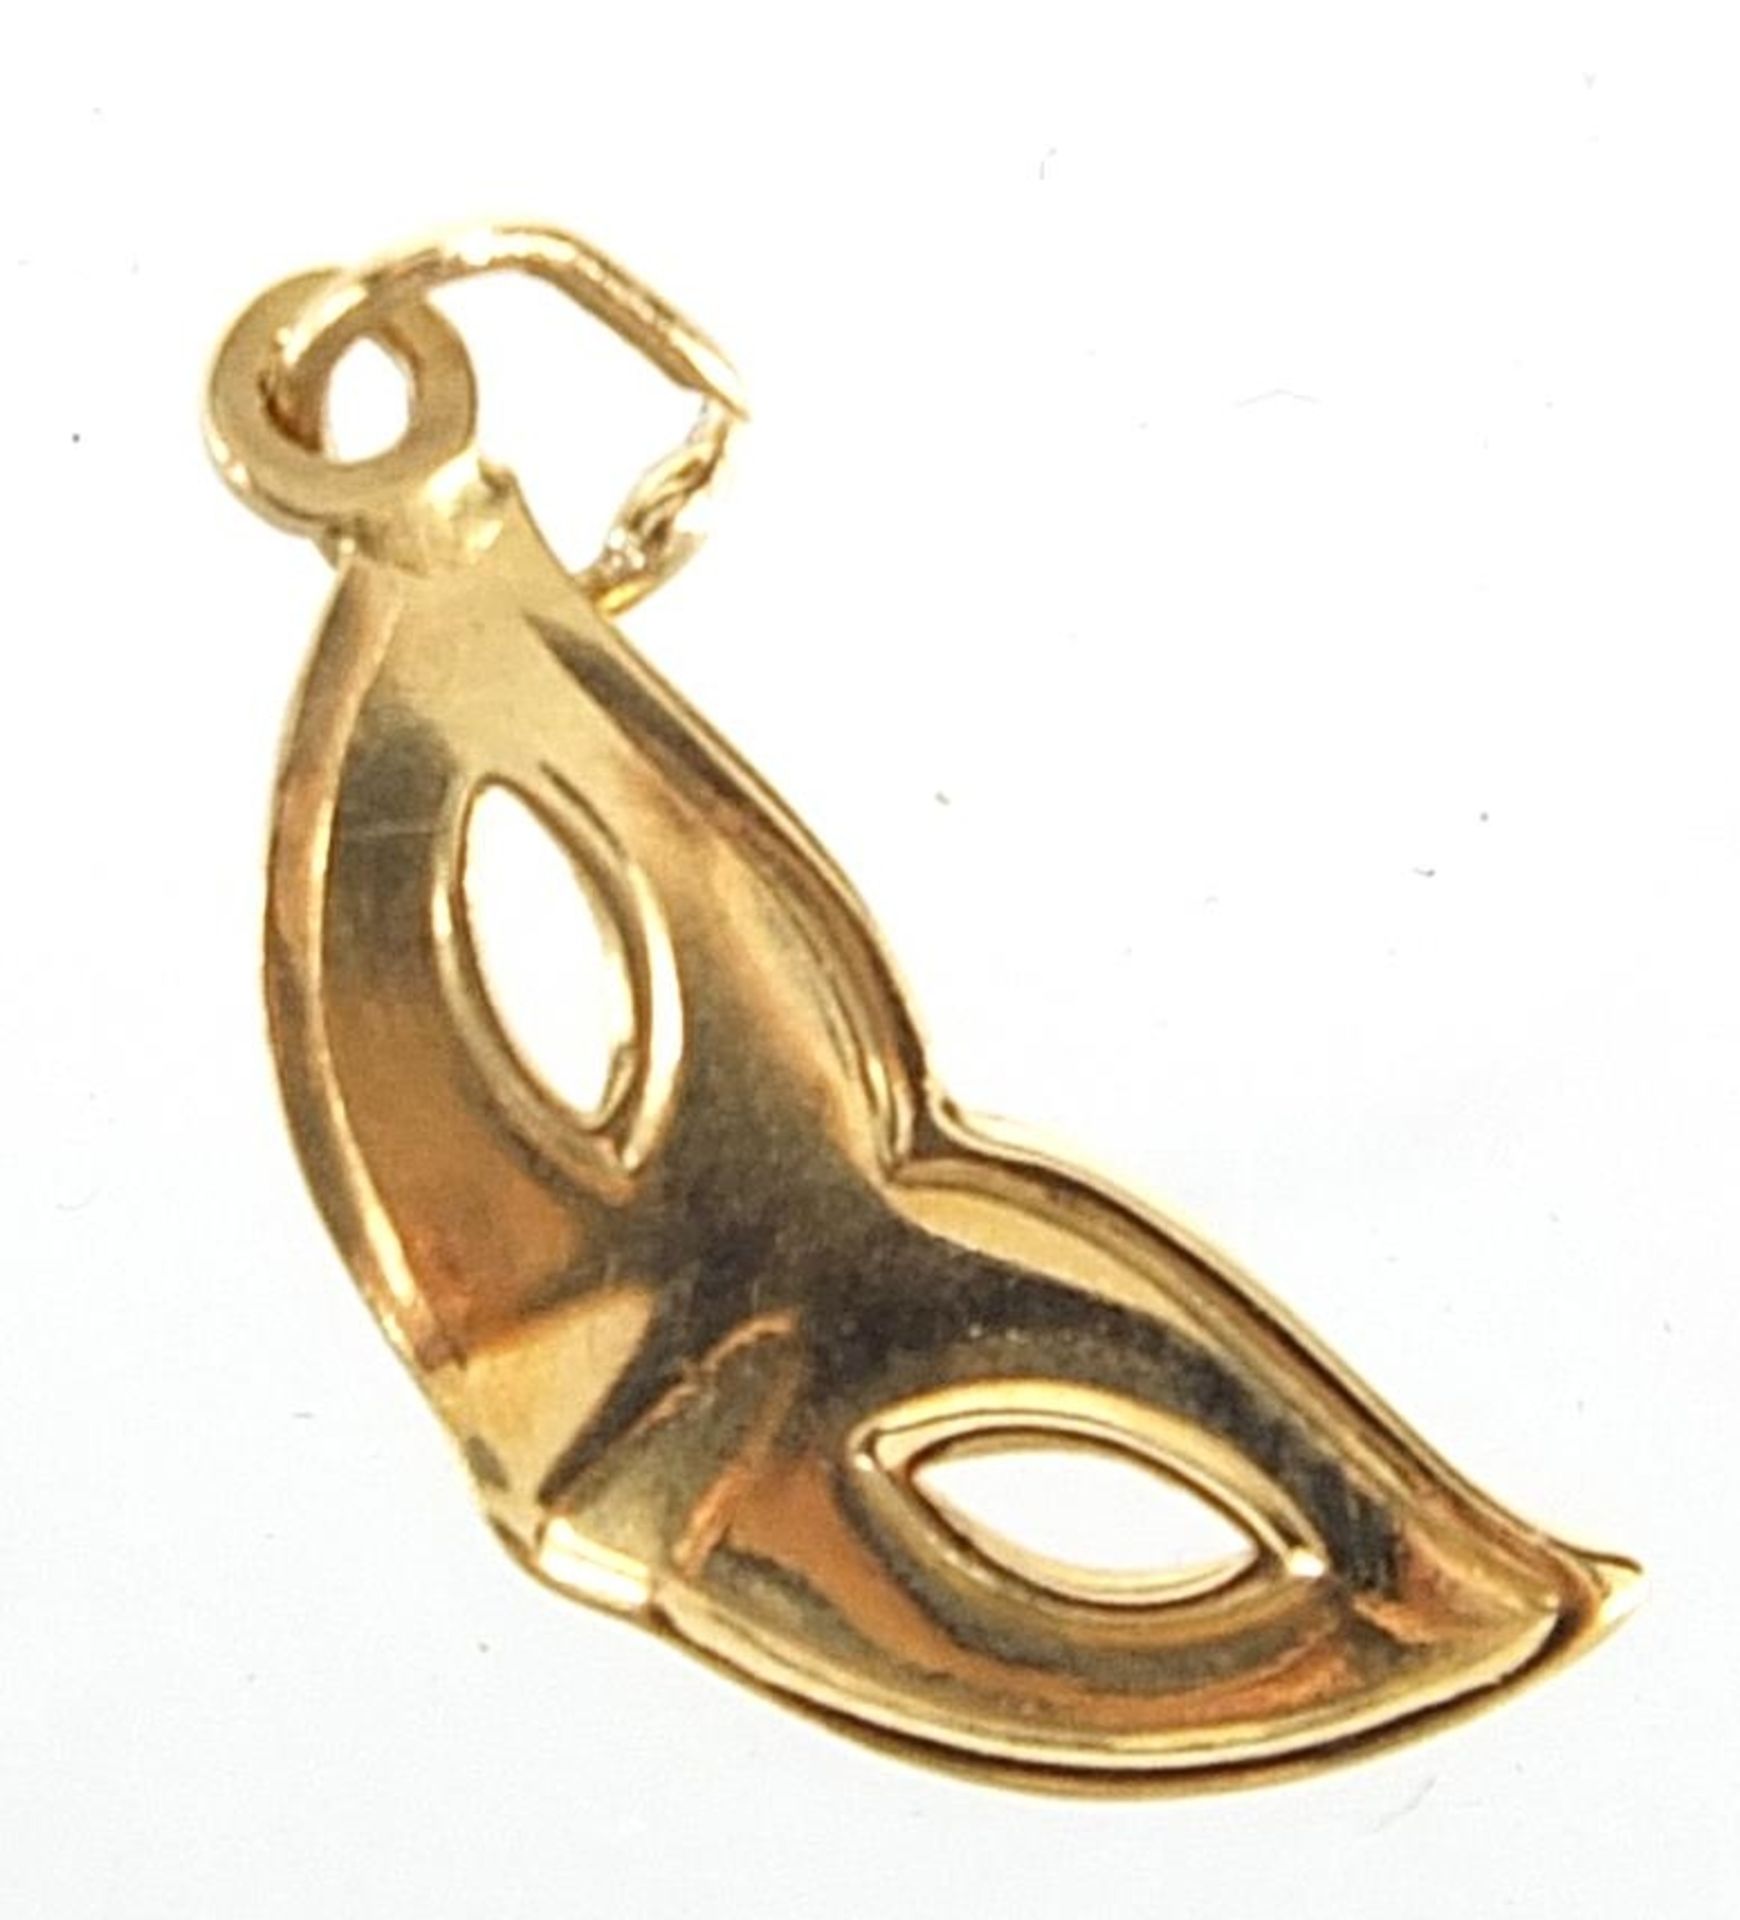 9ct gold masquerade mask charm, 1.7cm in length, 0.4g